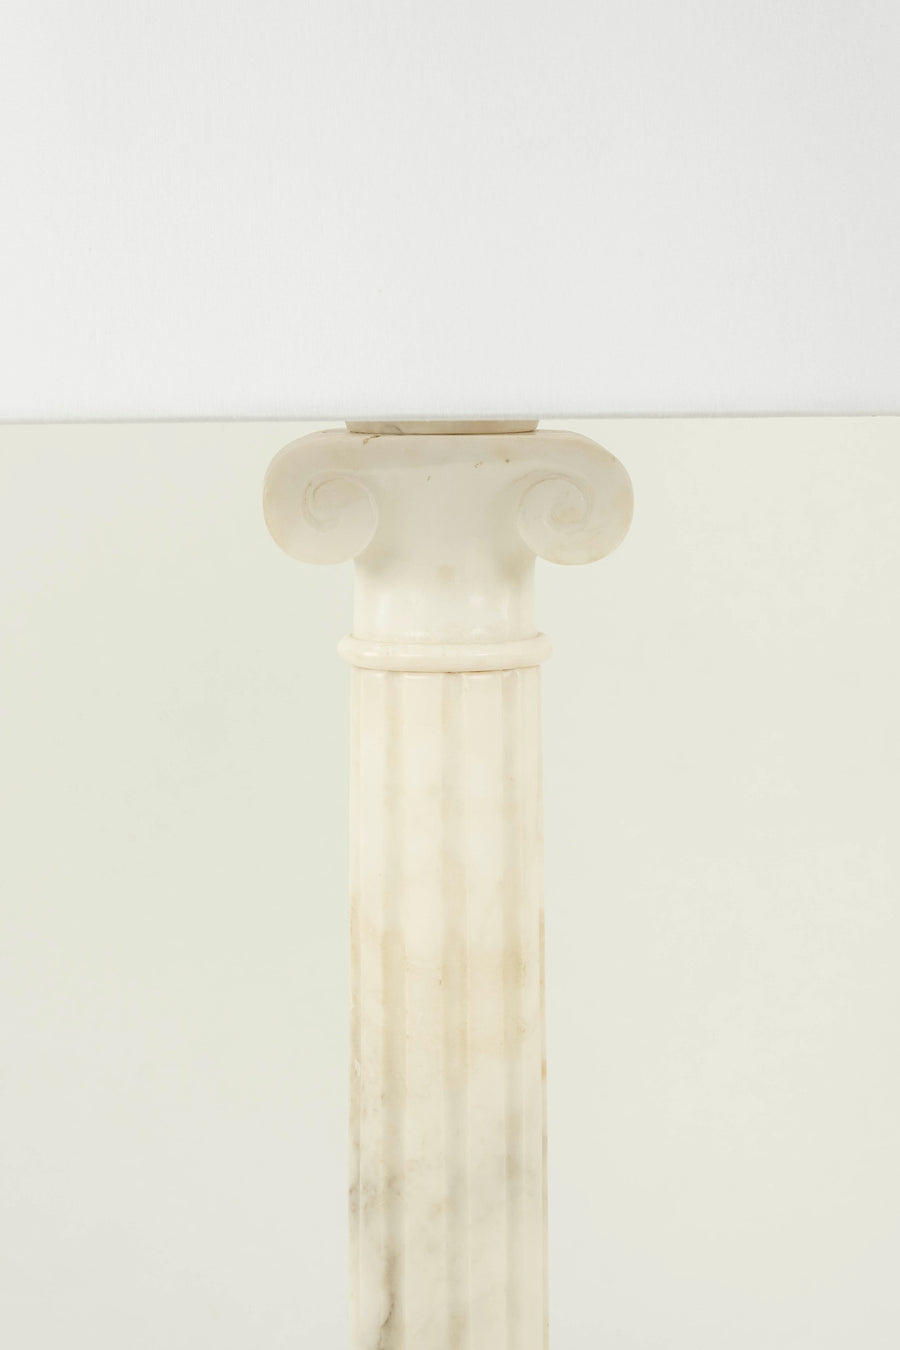 Pair Vintage Ionic Column Marble Table Lamps